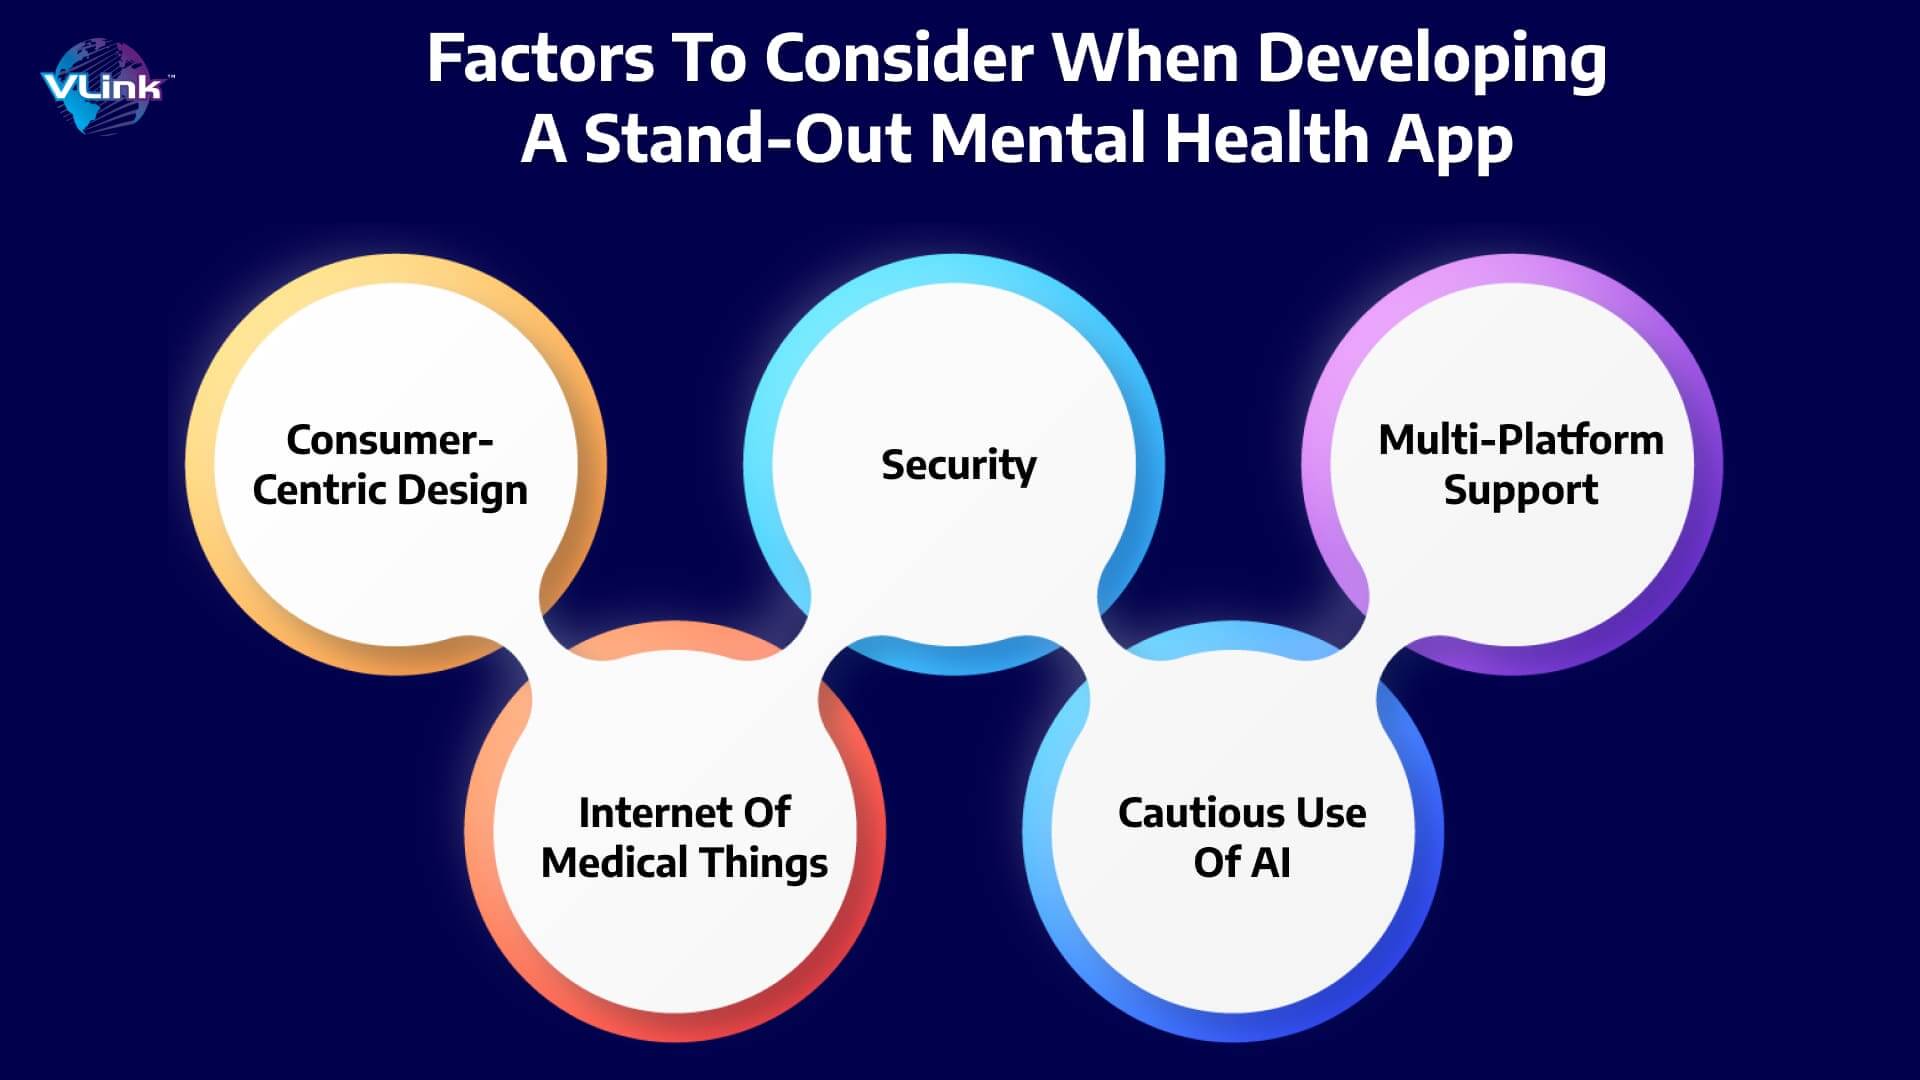 Factors to Consider When Developing a Stand-Out Mental Health App 